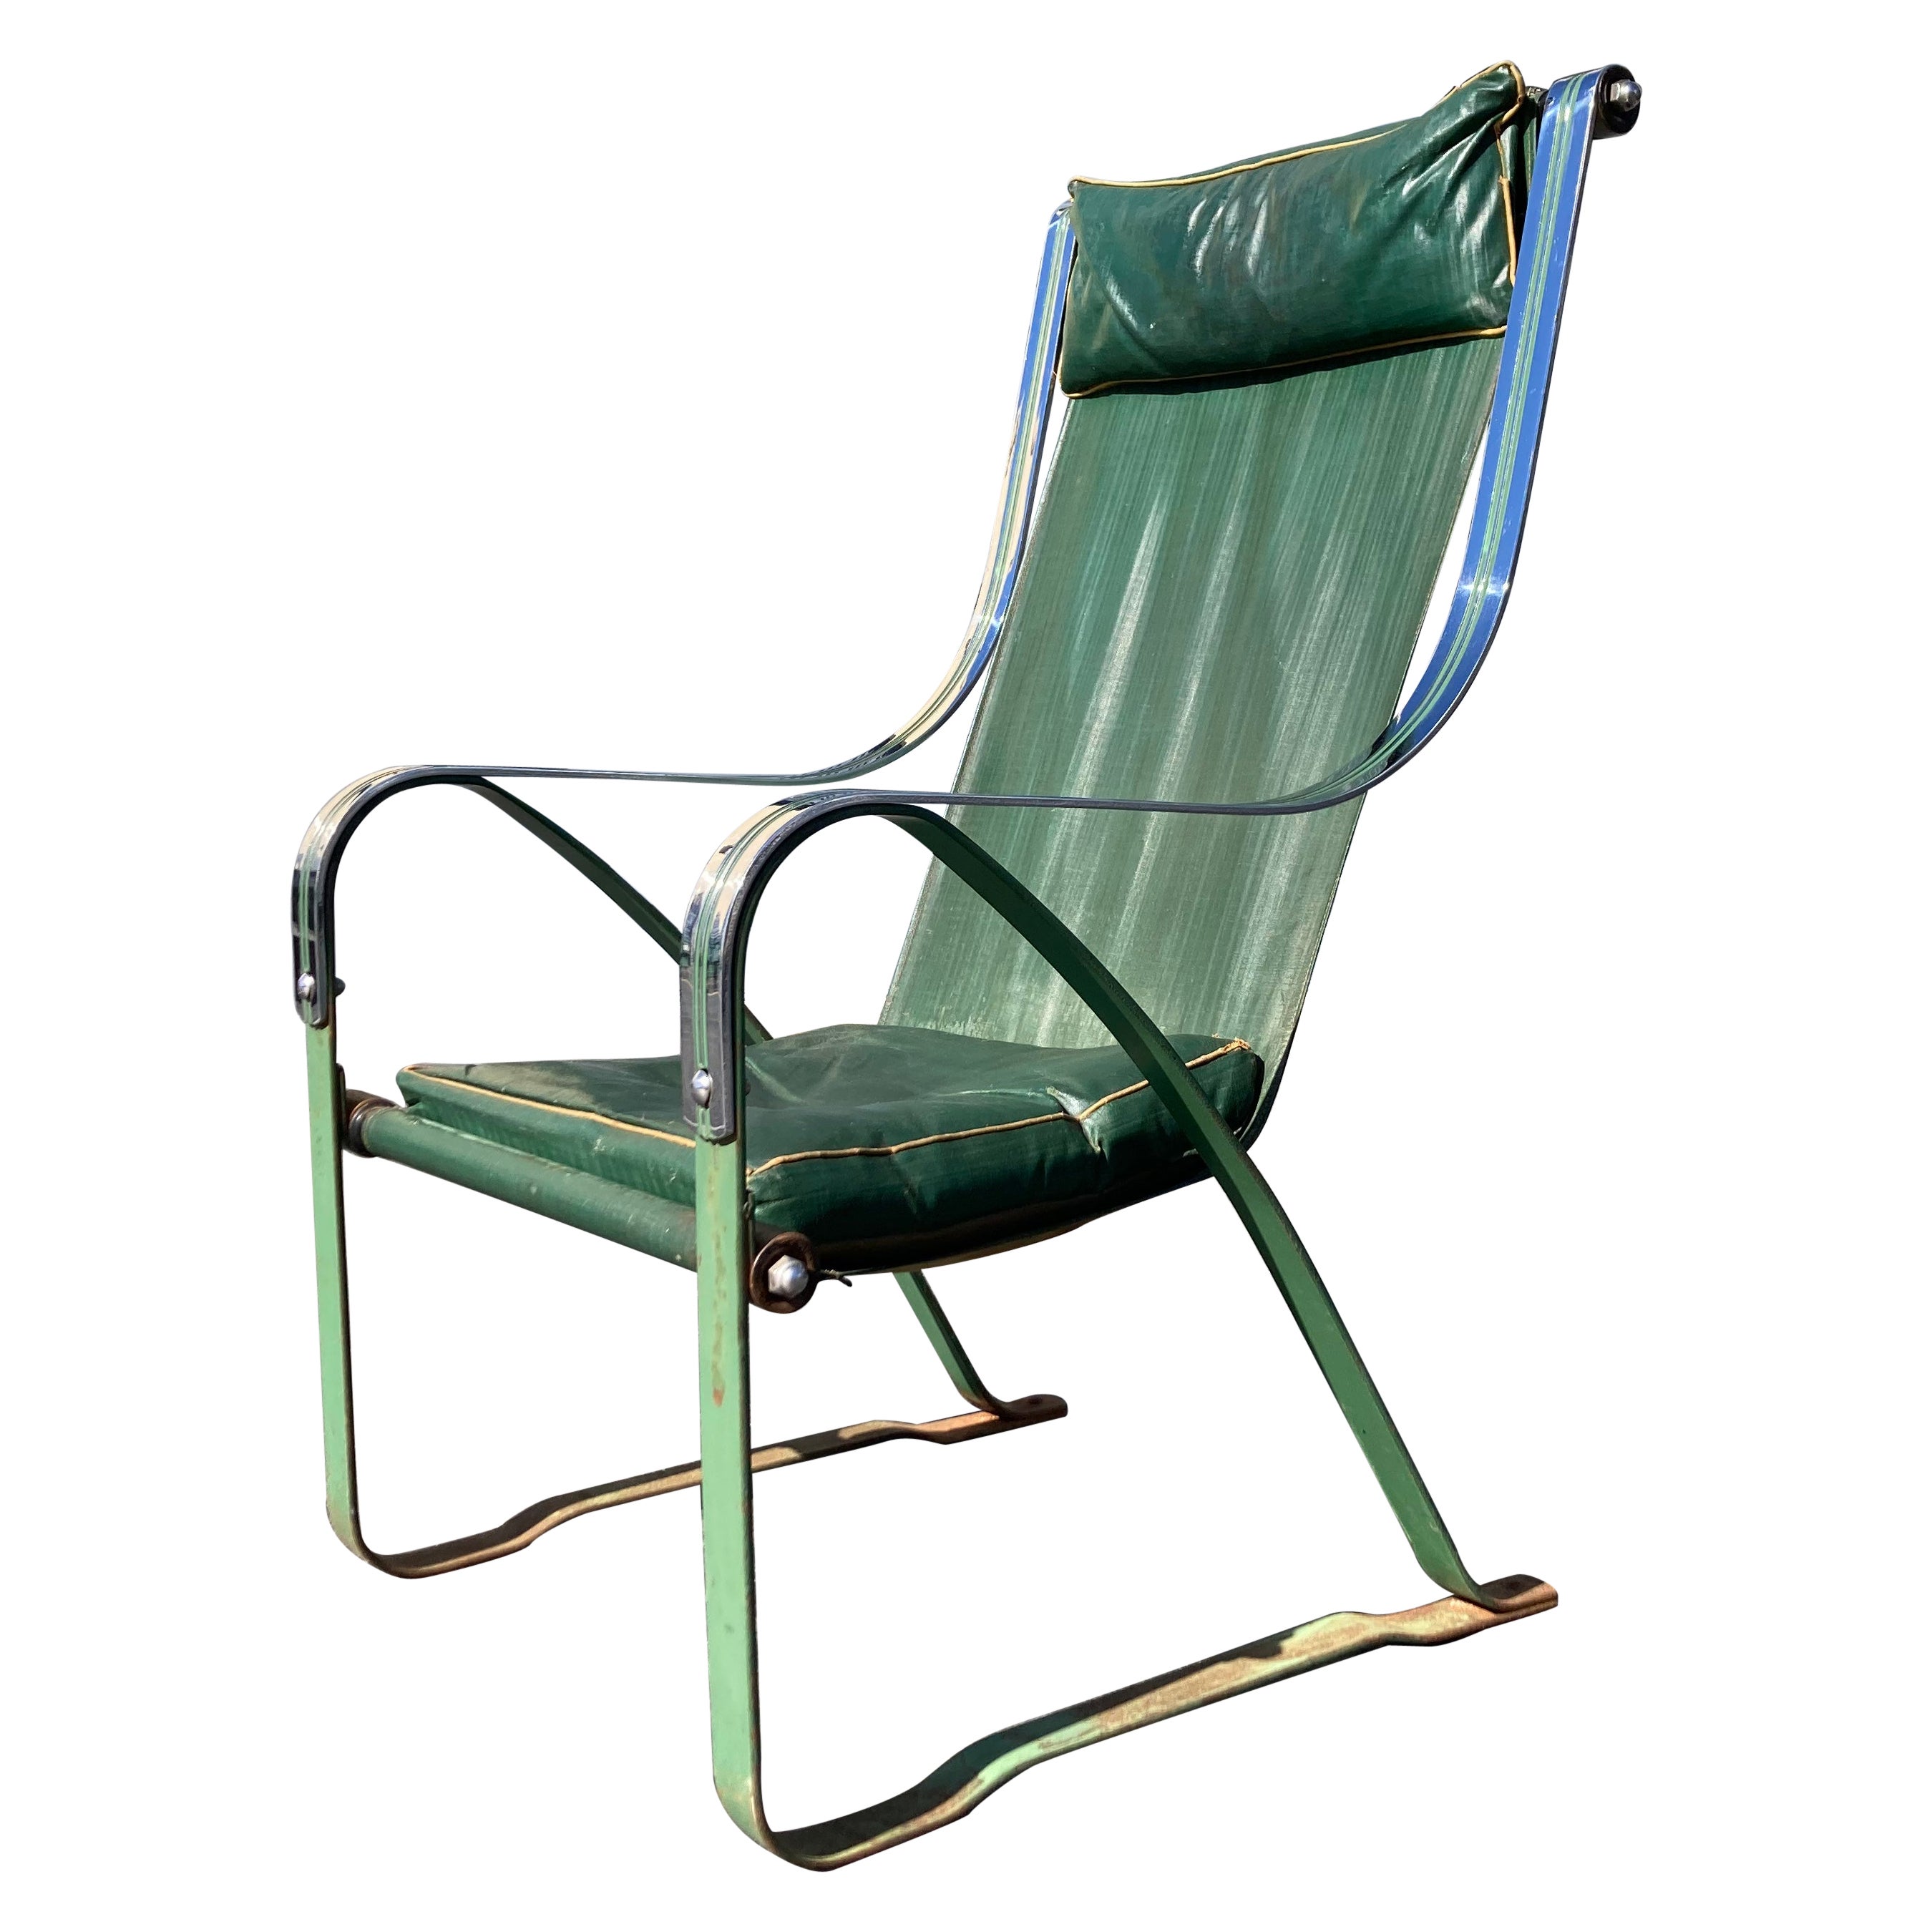 Green Sling Lounge Chair by Mckay Craft